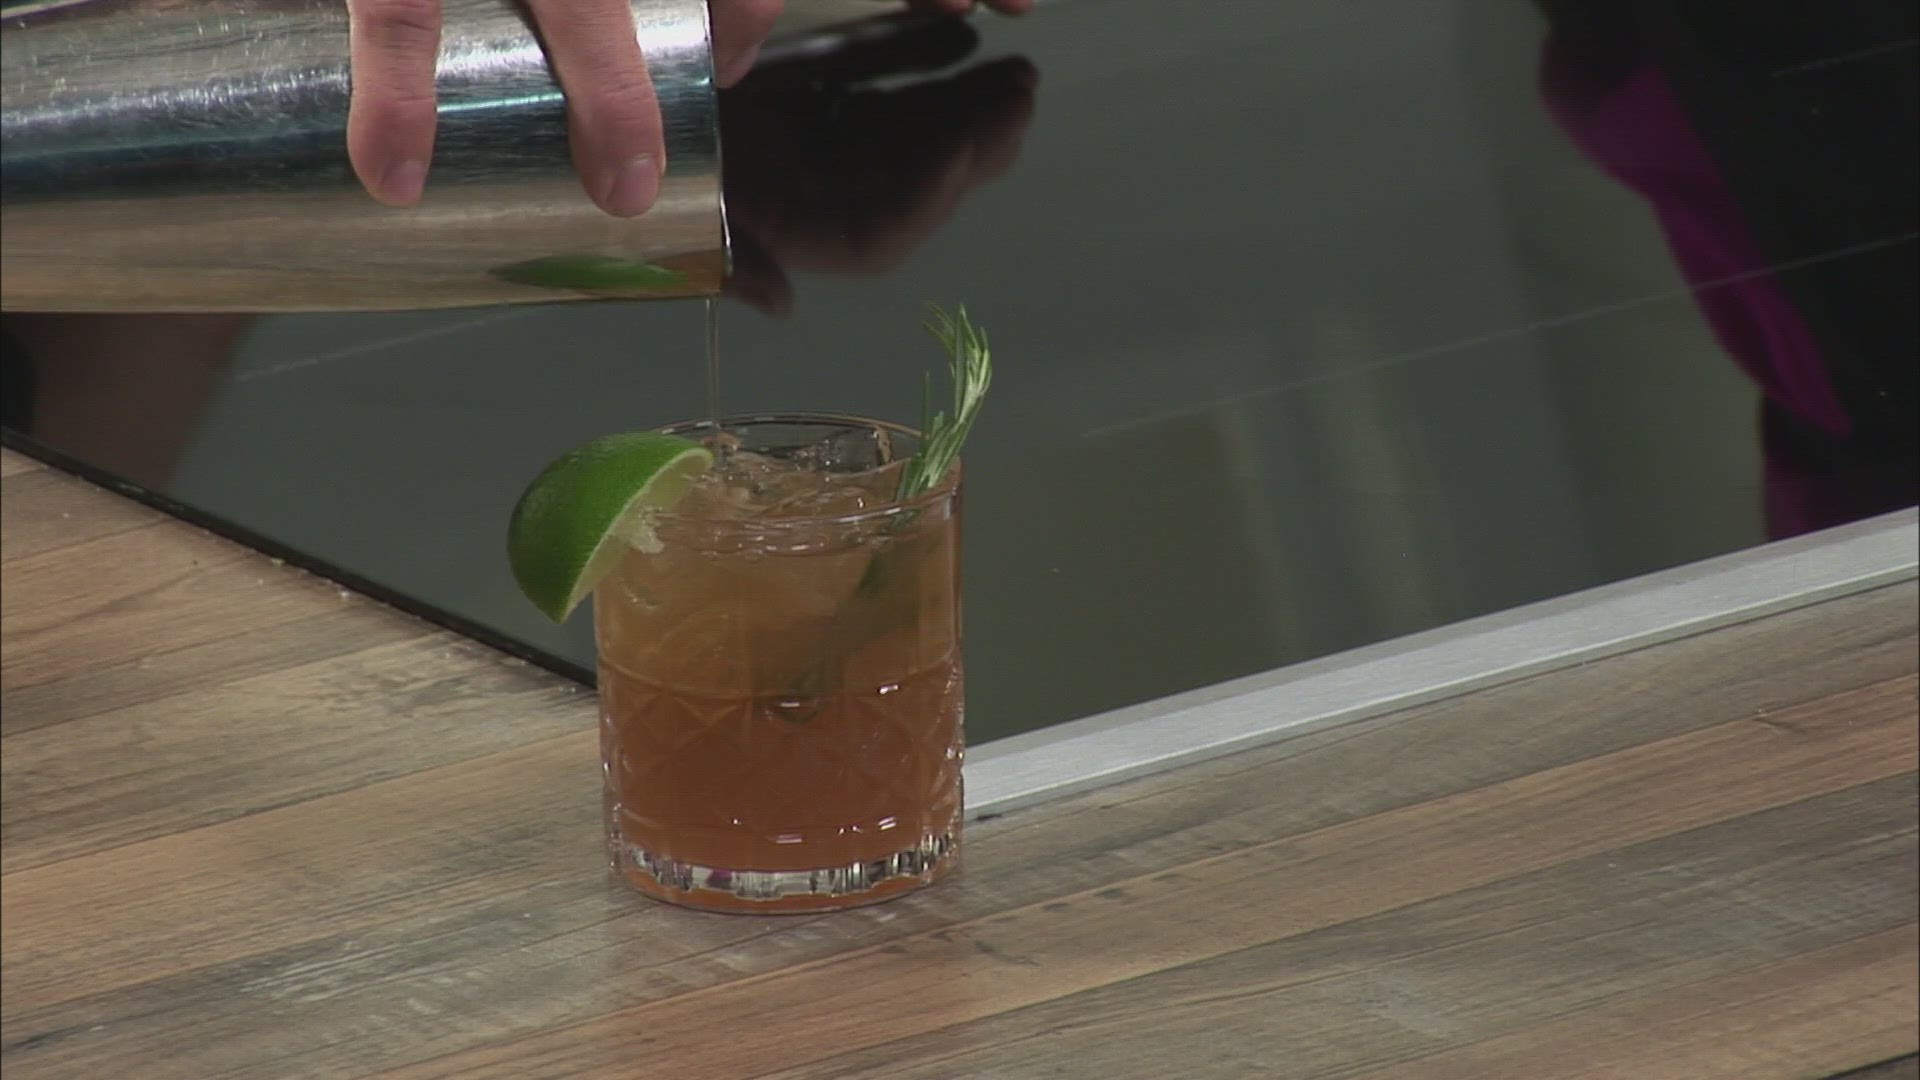 Chef Daron Goldstein from Provender Kitchen + Bar showed us how to make a margarita in the spirit of Maine Maple Sunday Weekend.